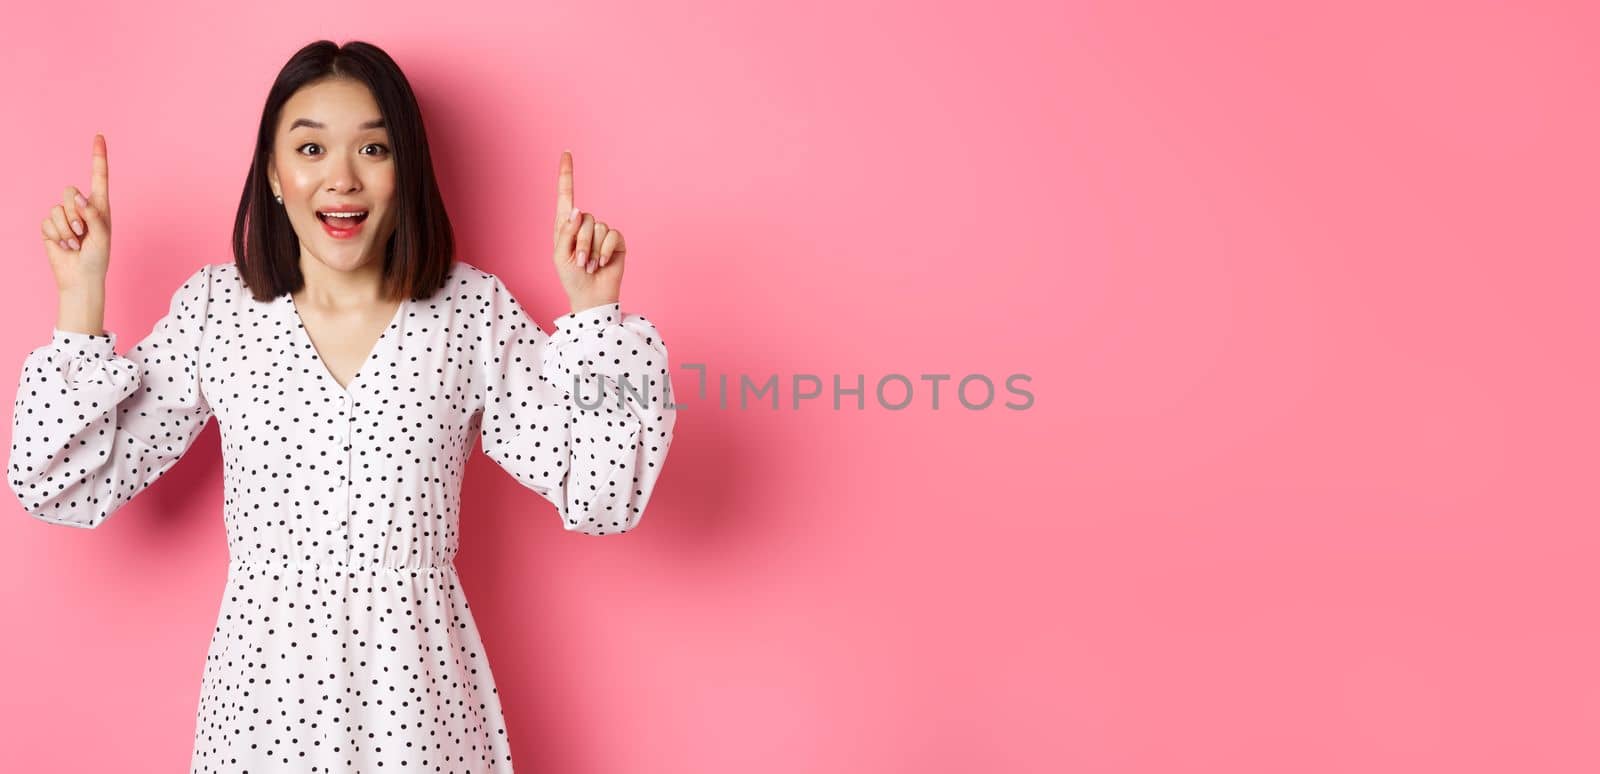 Amazed brunette asian girl pointing fingers up, showing advertisement, demonstrate spring promo offer, standing over pink background.